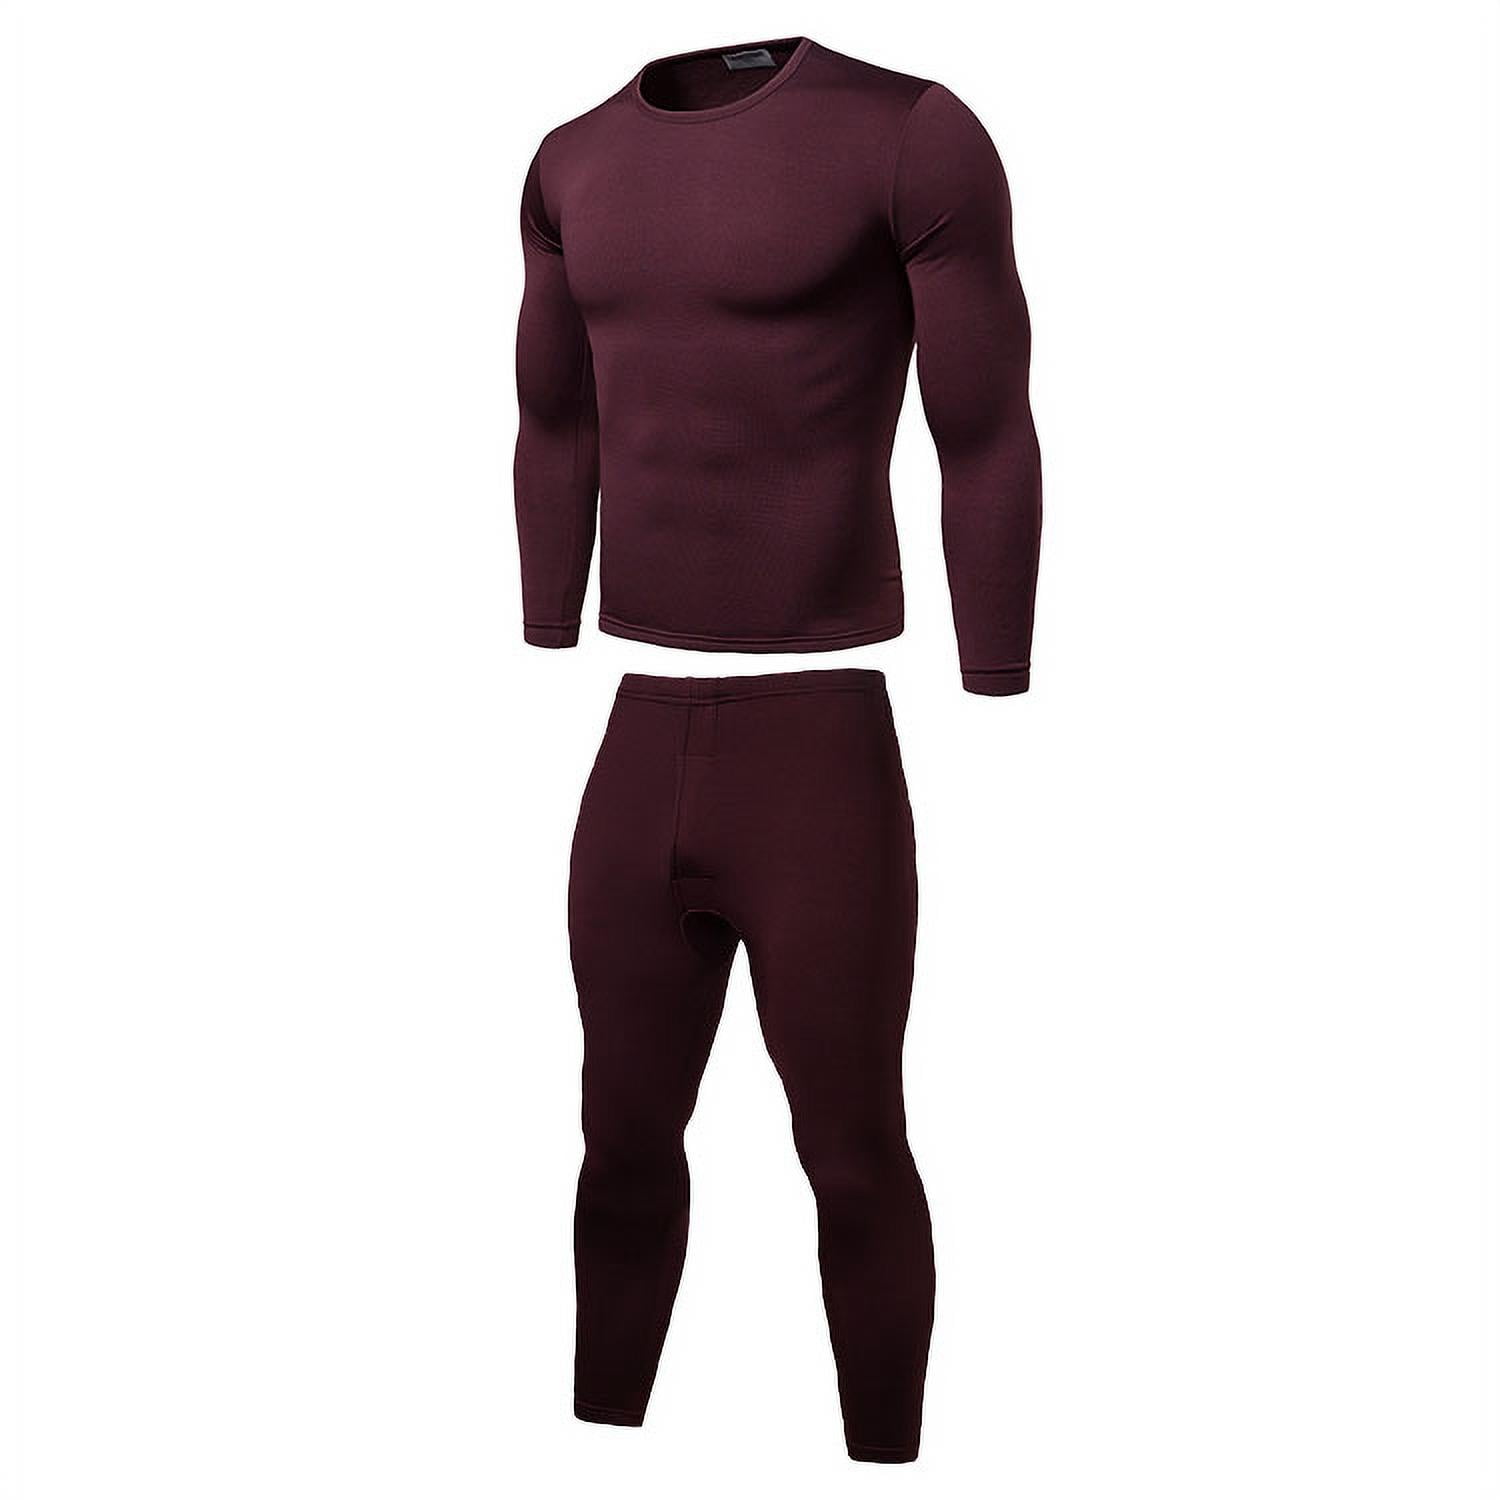 Men's Thermal Underwear for Cold Weather Running: How to Dress for Suc–  Thermajohn